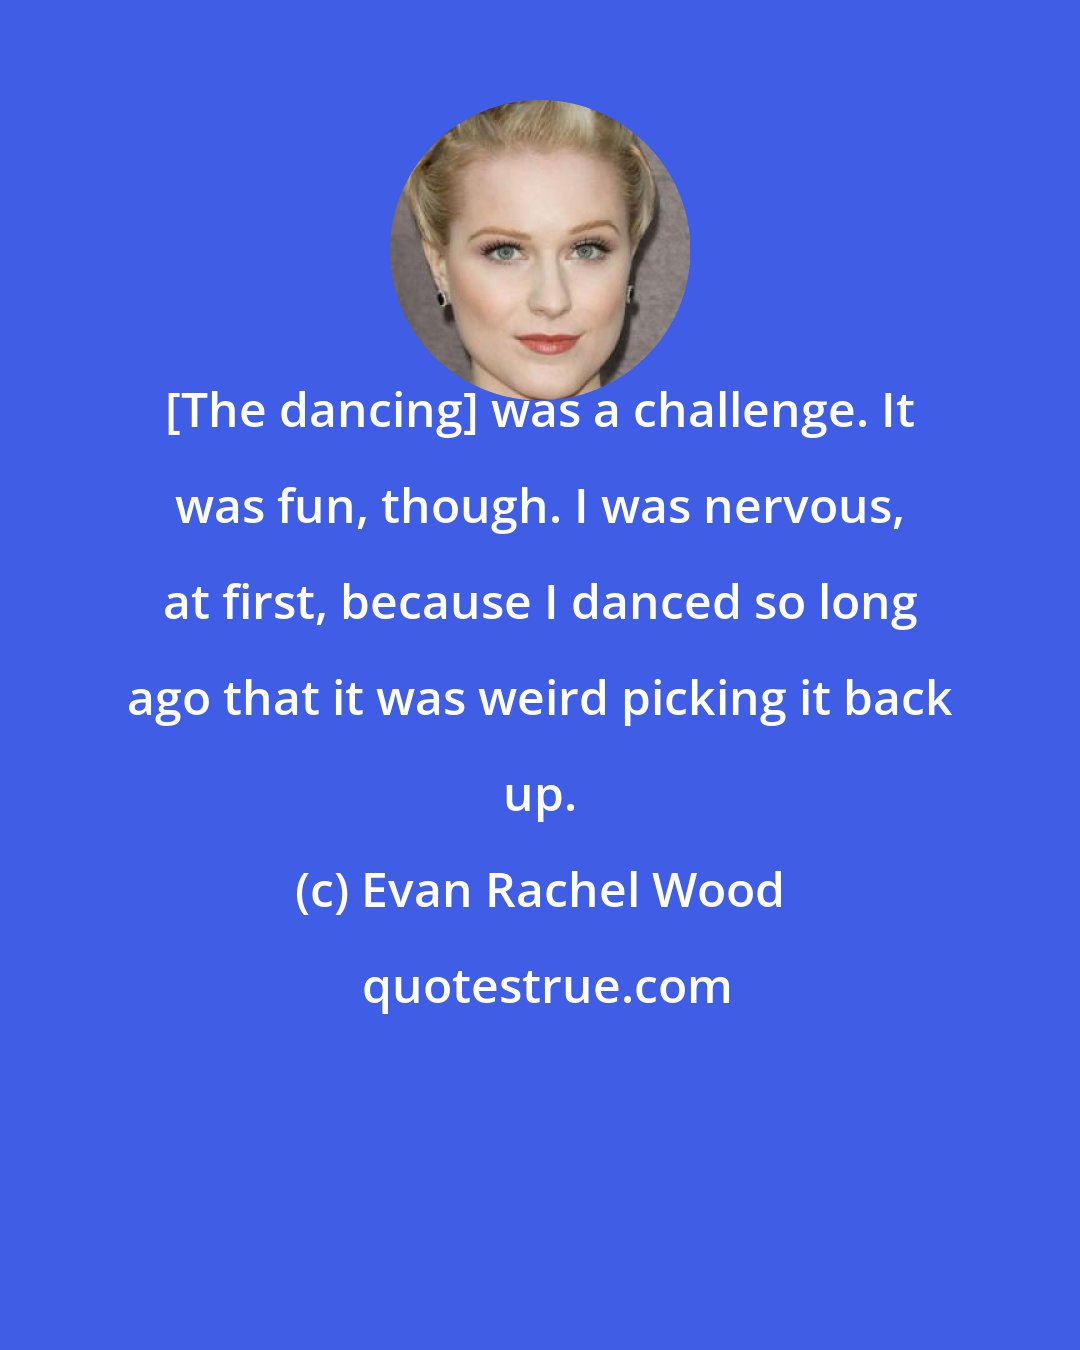 Evan Rachel Wood: [The dancing] was a challenge. It was fun, though. I was nervous, at first, because I danced so long ago that it was weird picking it back up.